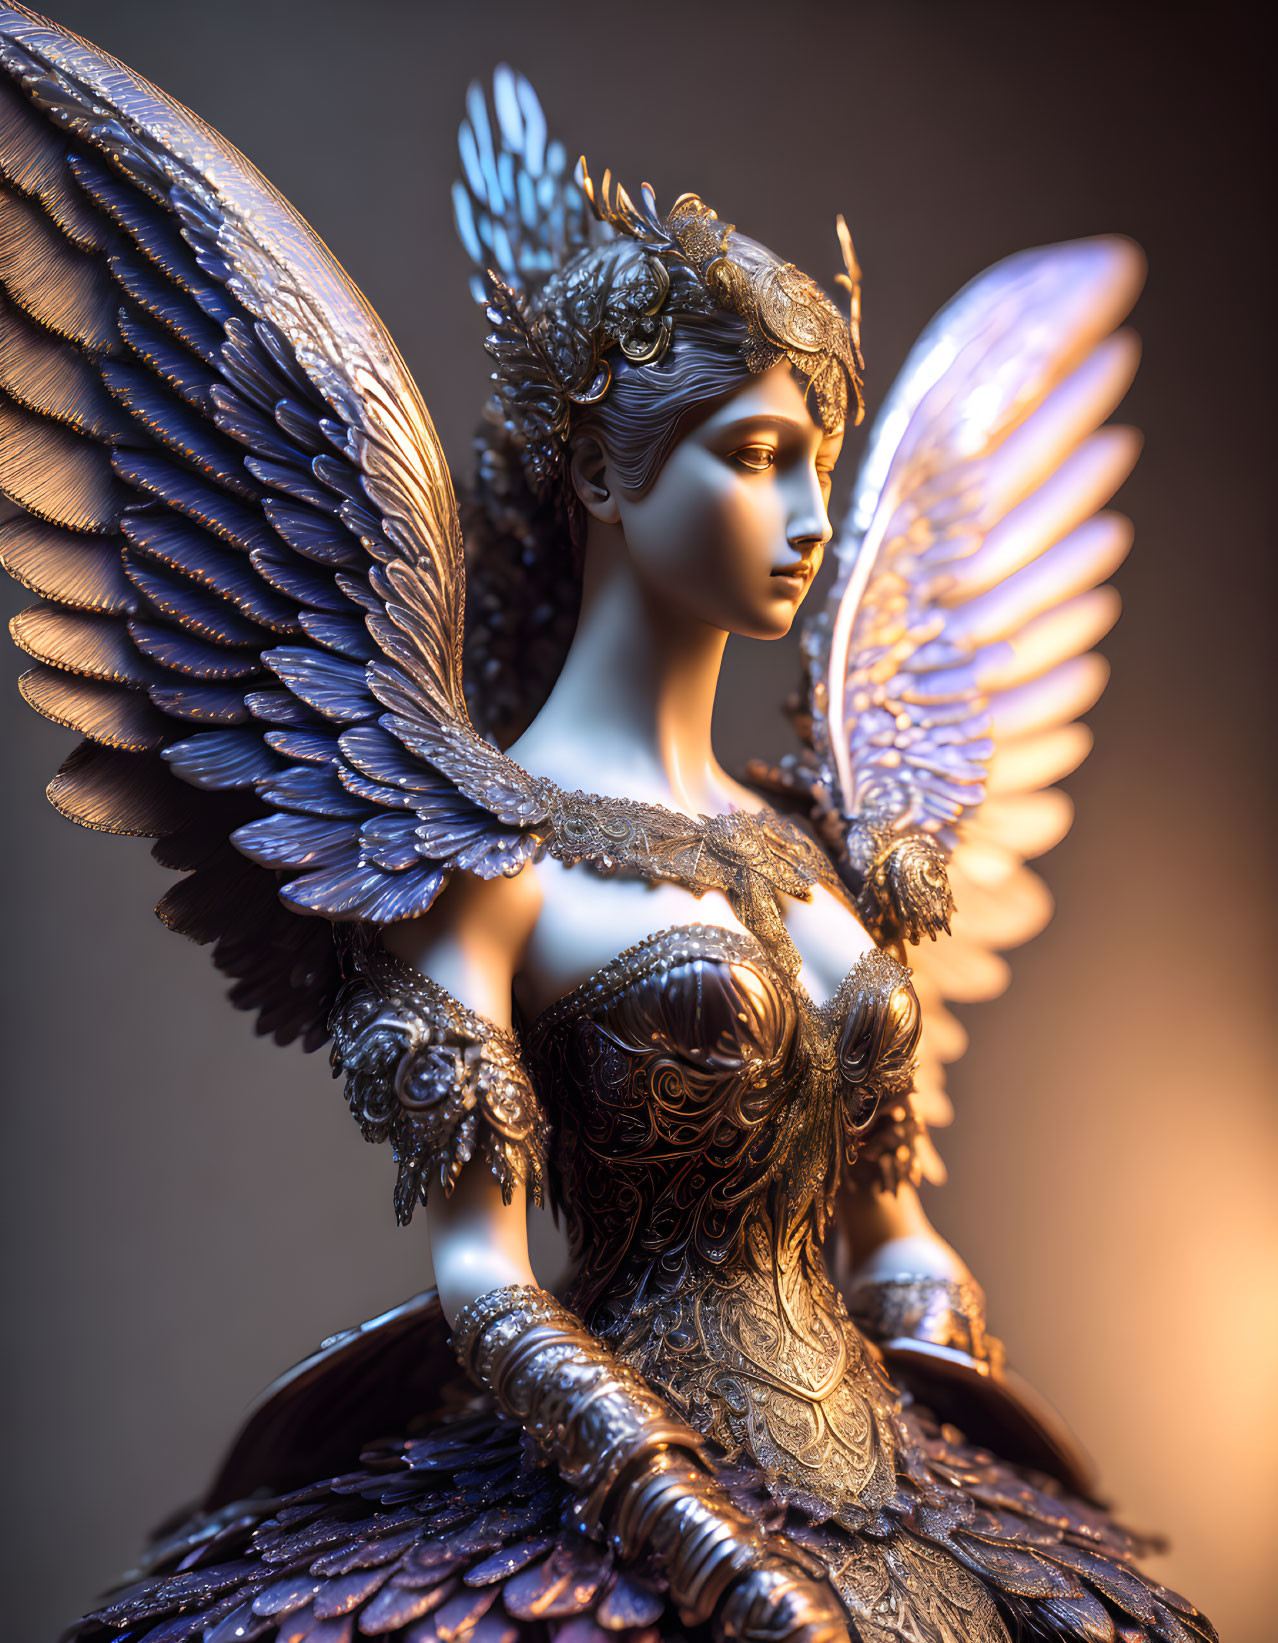 Intricately detailed statue of winged female figure in ornate armor